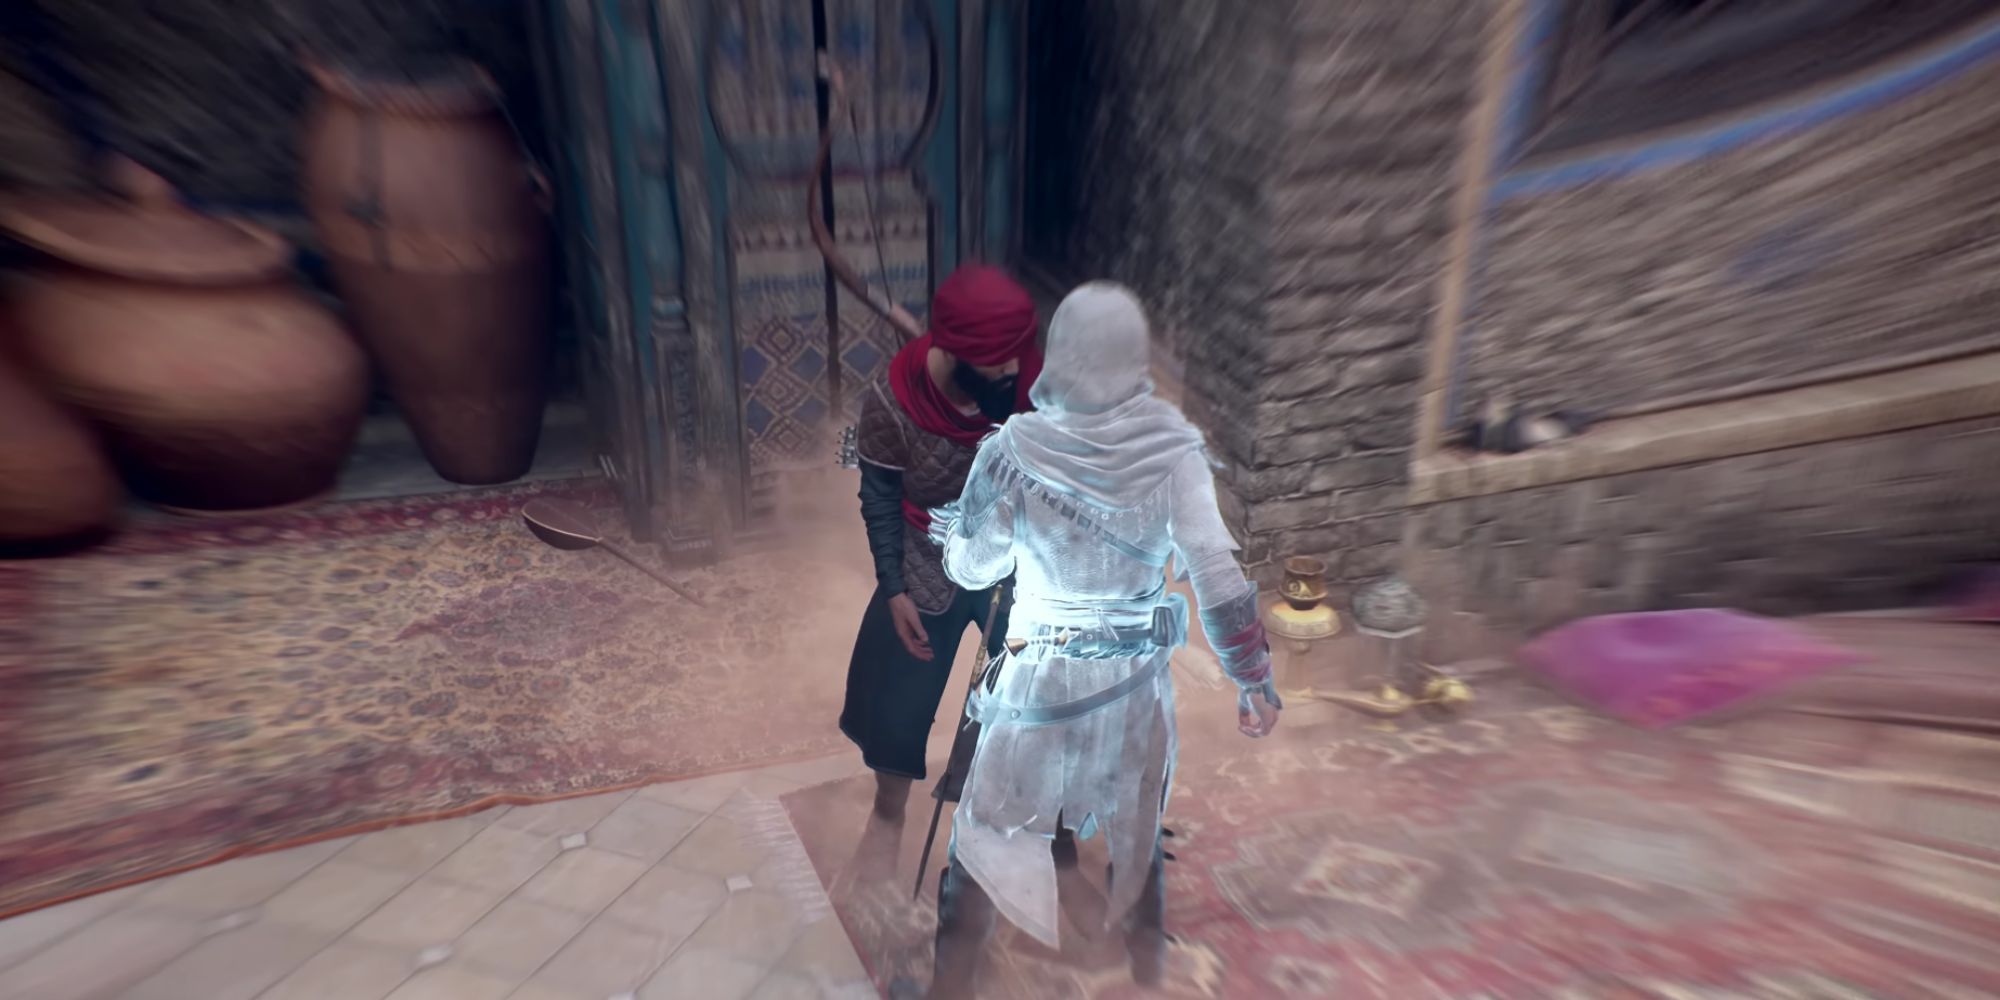 Basim using a teleport assassination in Assassin's Creed Mirage.